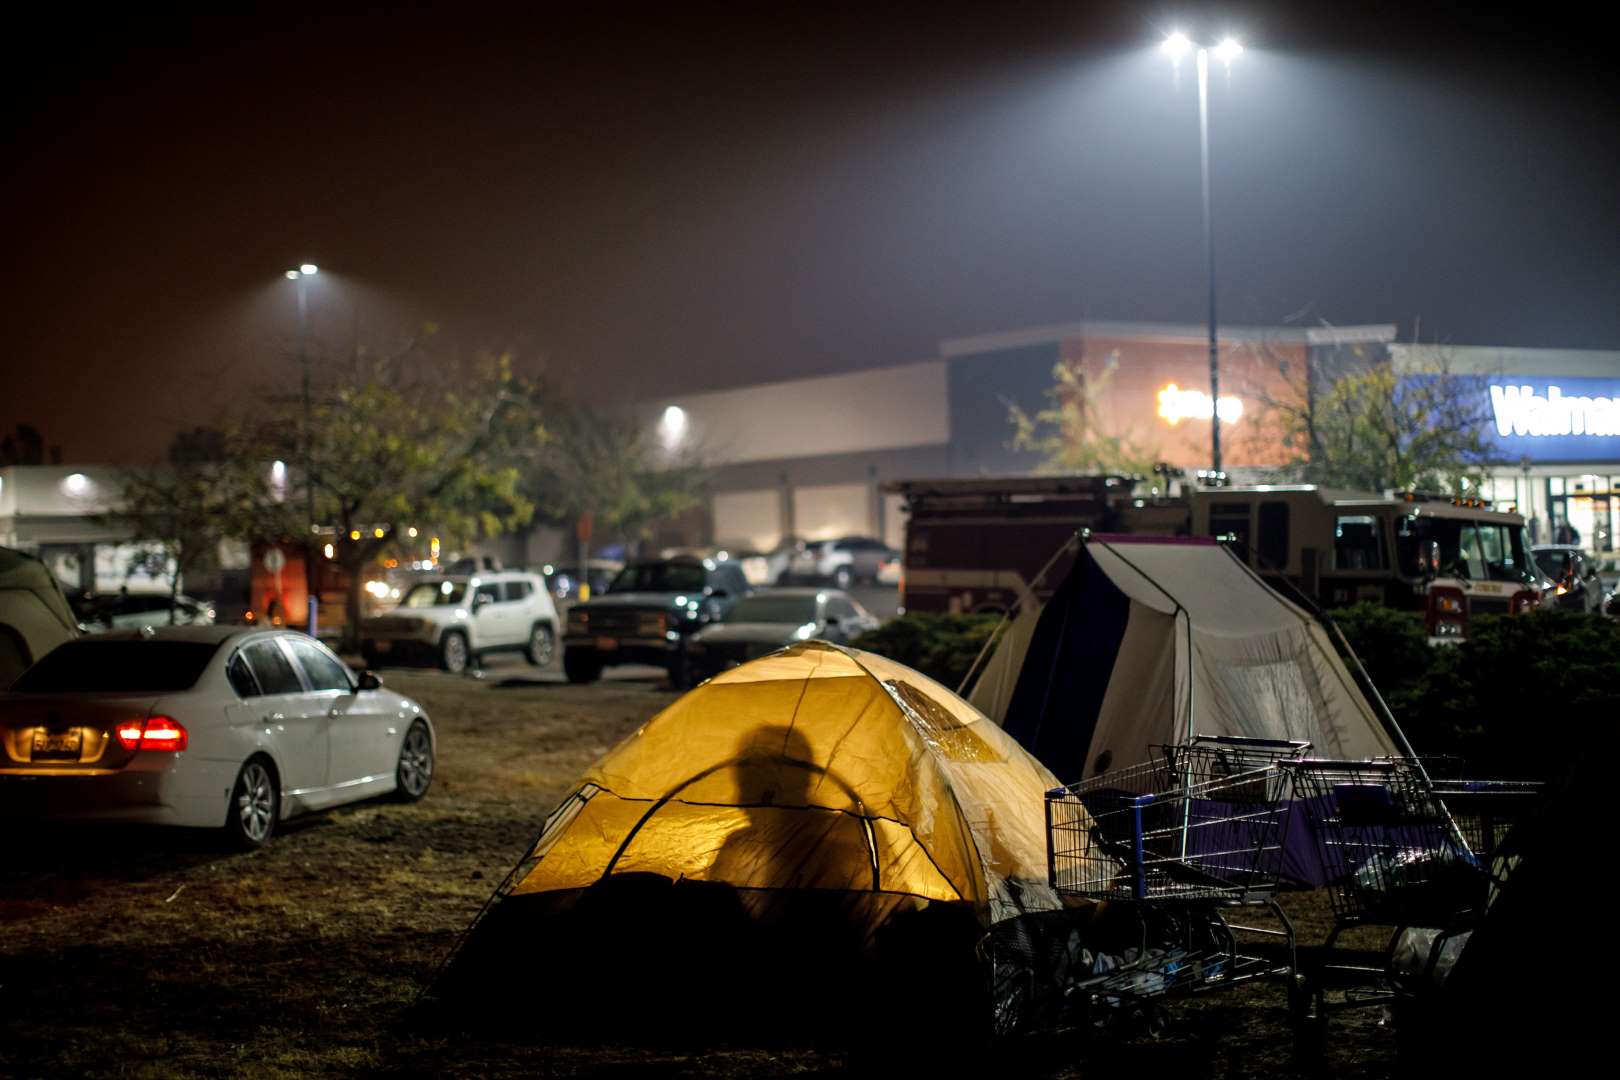 Evacuees from the Camp Fire have congregated in tents and in their vehicles as they seek shelter in a Walmart parking lot in Chico, California, on 13 November 2018. Photo: Marcus Yam / Los Angeles Times / TNS